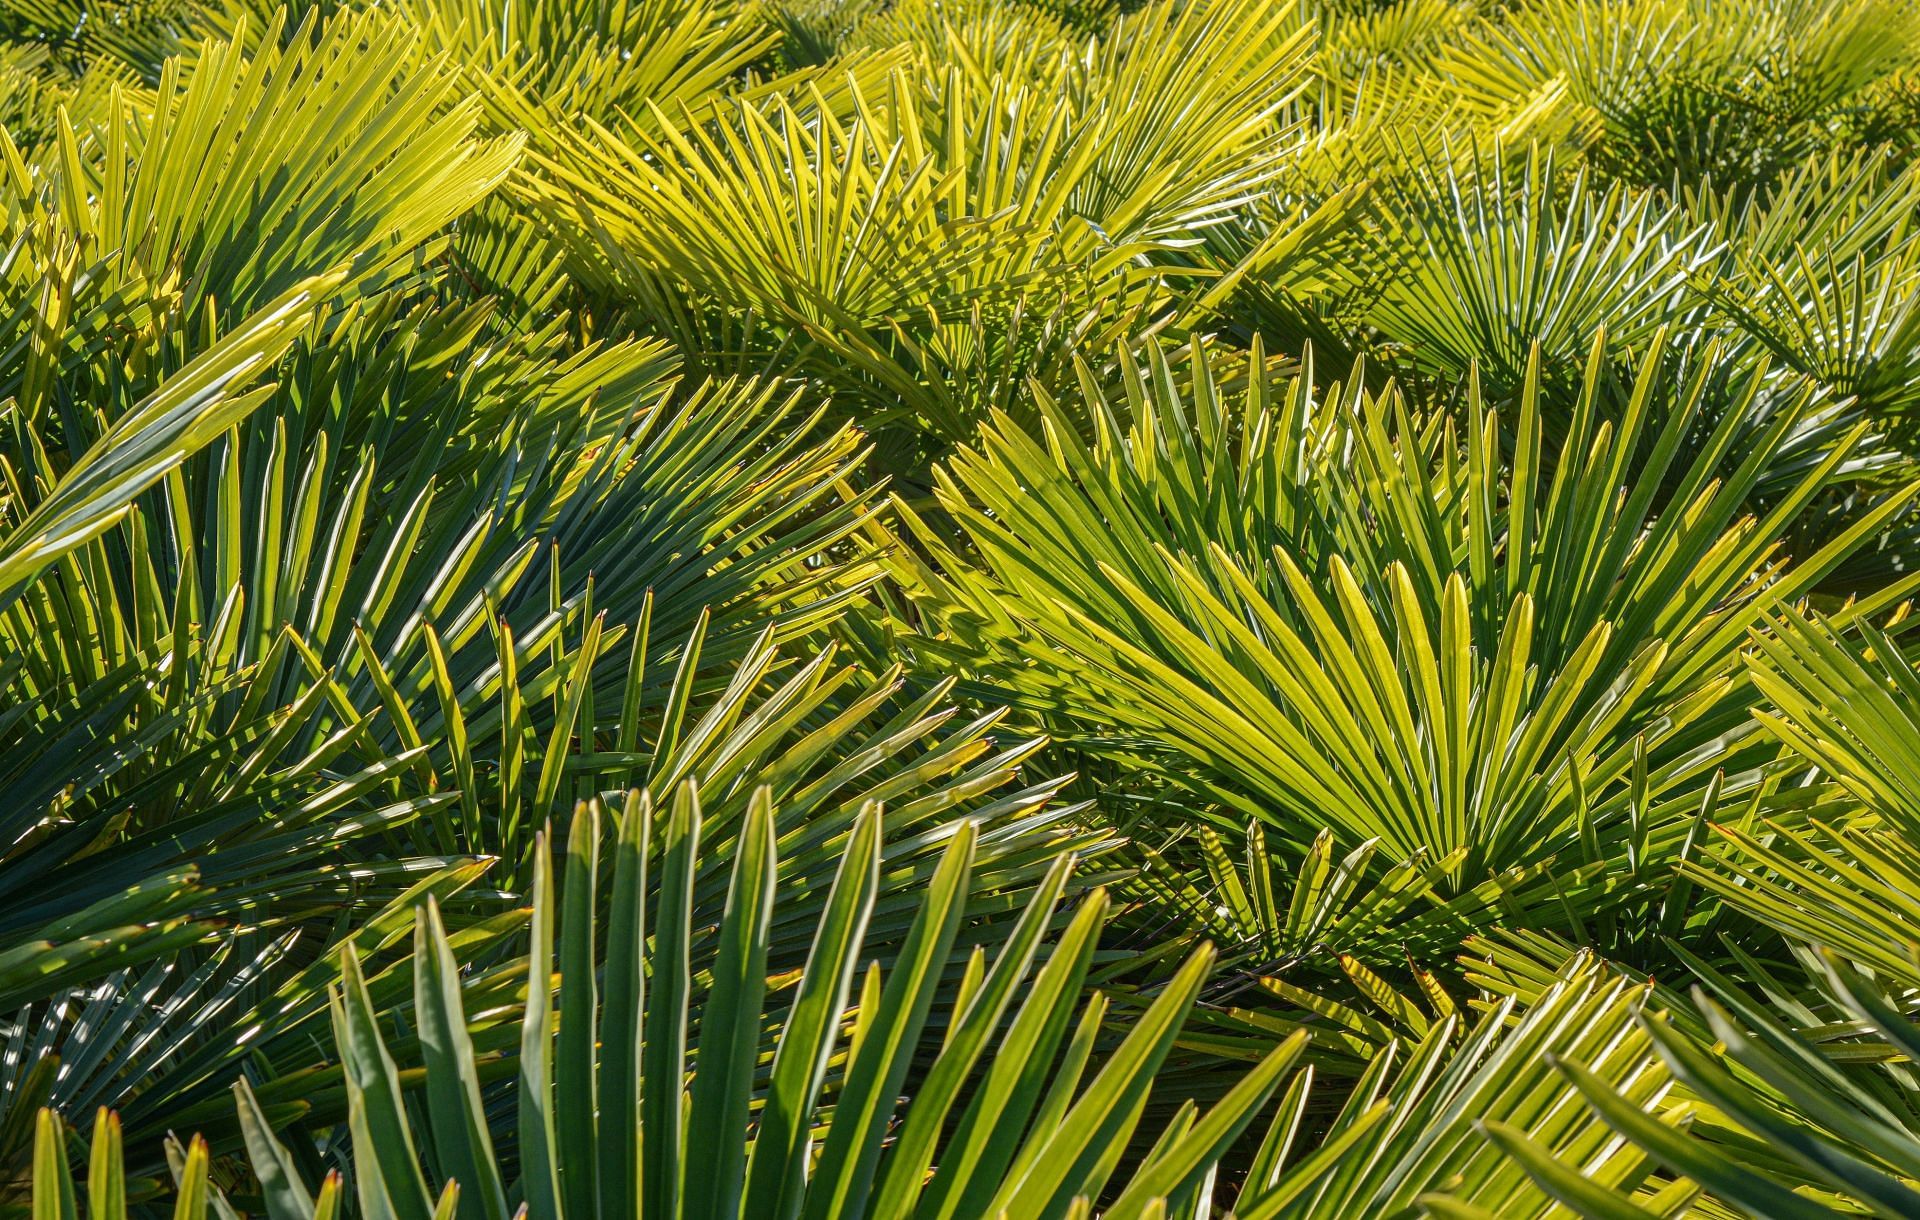 It is a plant native to Central and South America. (Image via Pexels/ Veres Szilard)